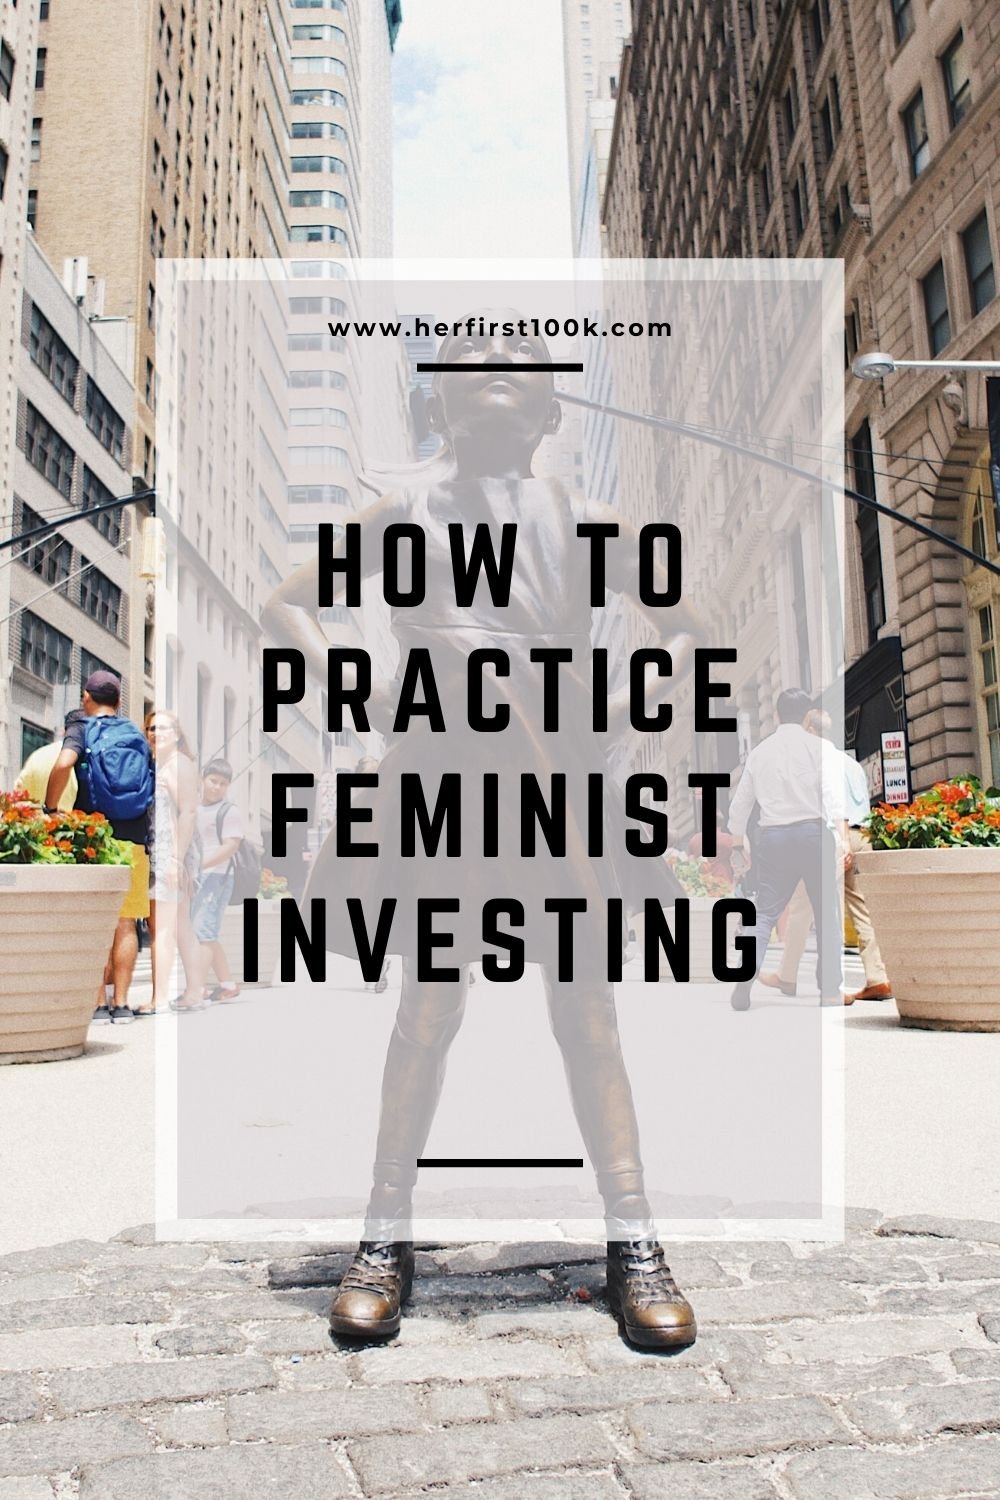 Statue of Fearless Girl on Wallstreet, text overlay "How to Practice Feminist Investing"